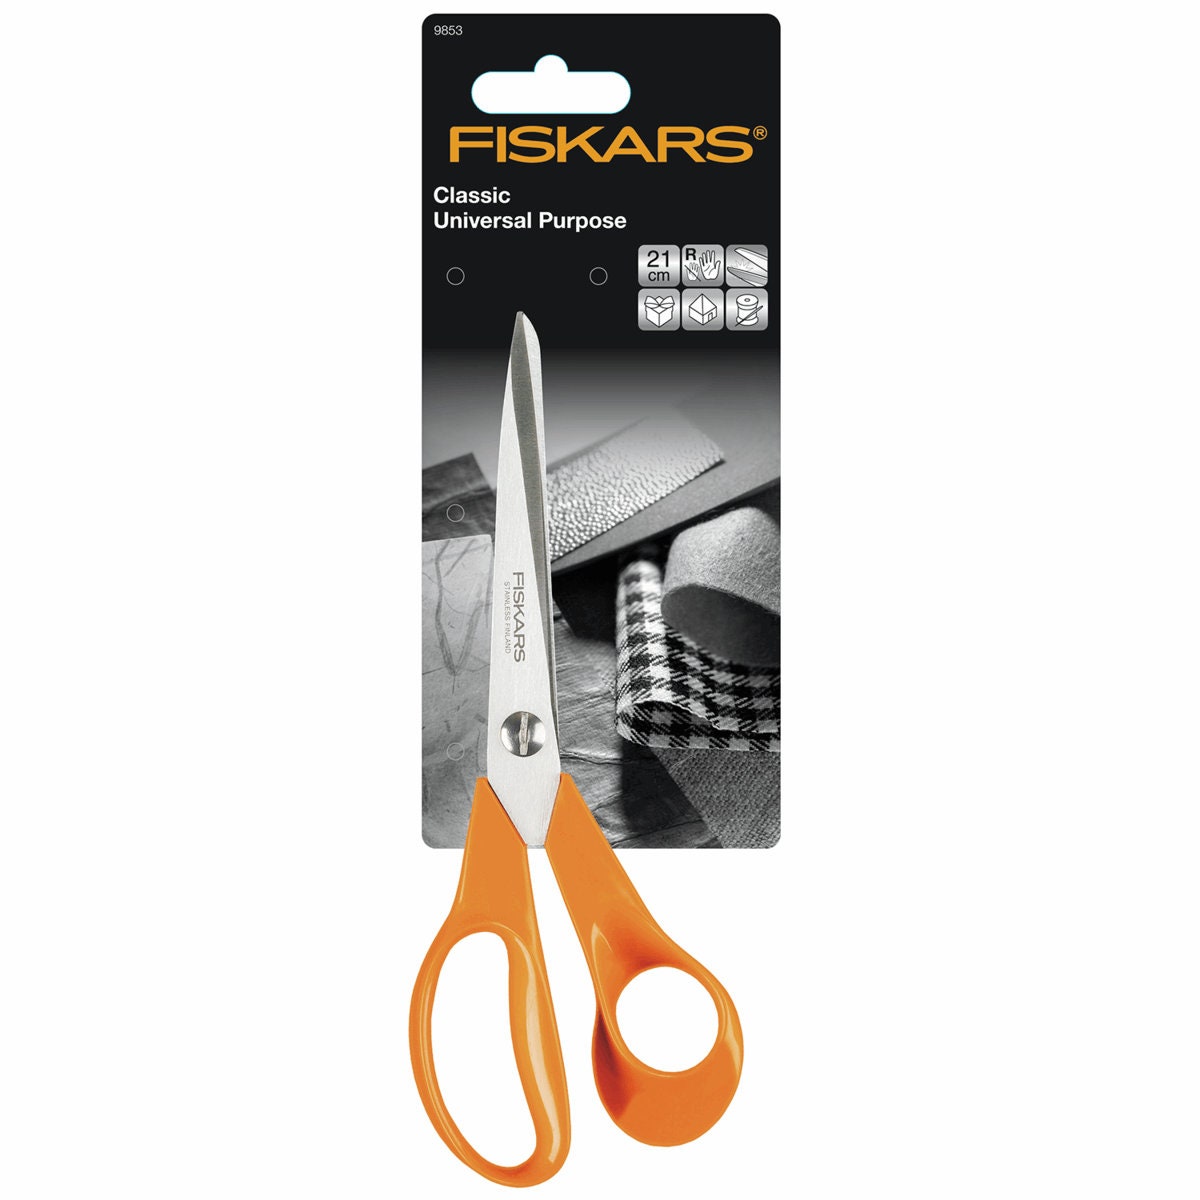 Premium Quality Fiskars Rotary Cutter Blade Stick Trigger 45mm Cutting  Fabric Right Hand Left Hand Sewing Tools Crafts Supplies 